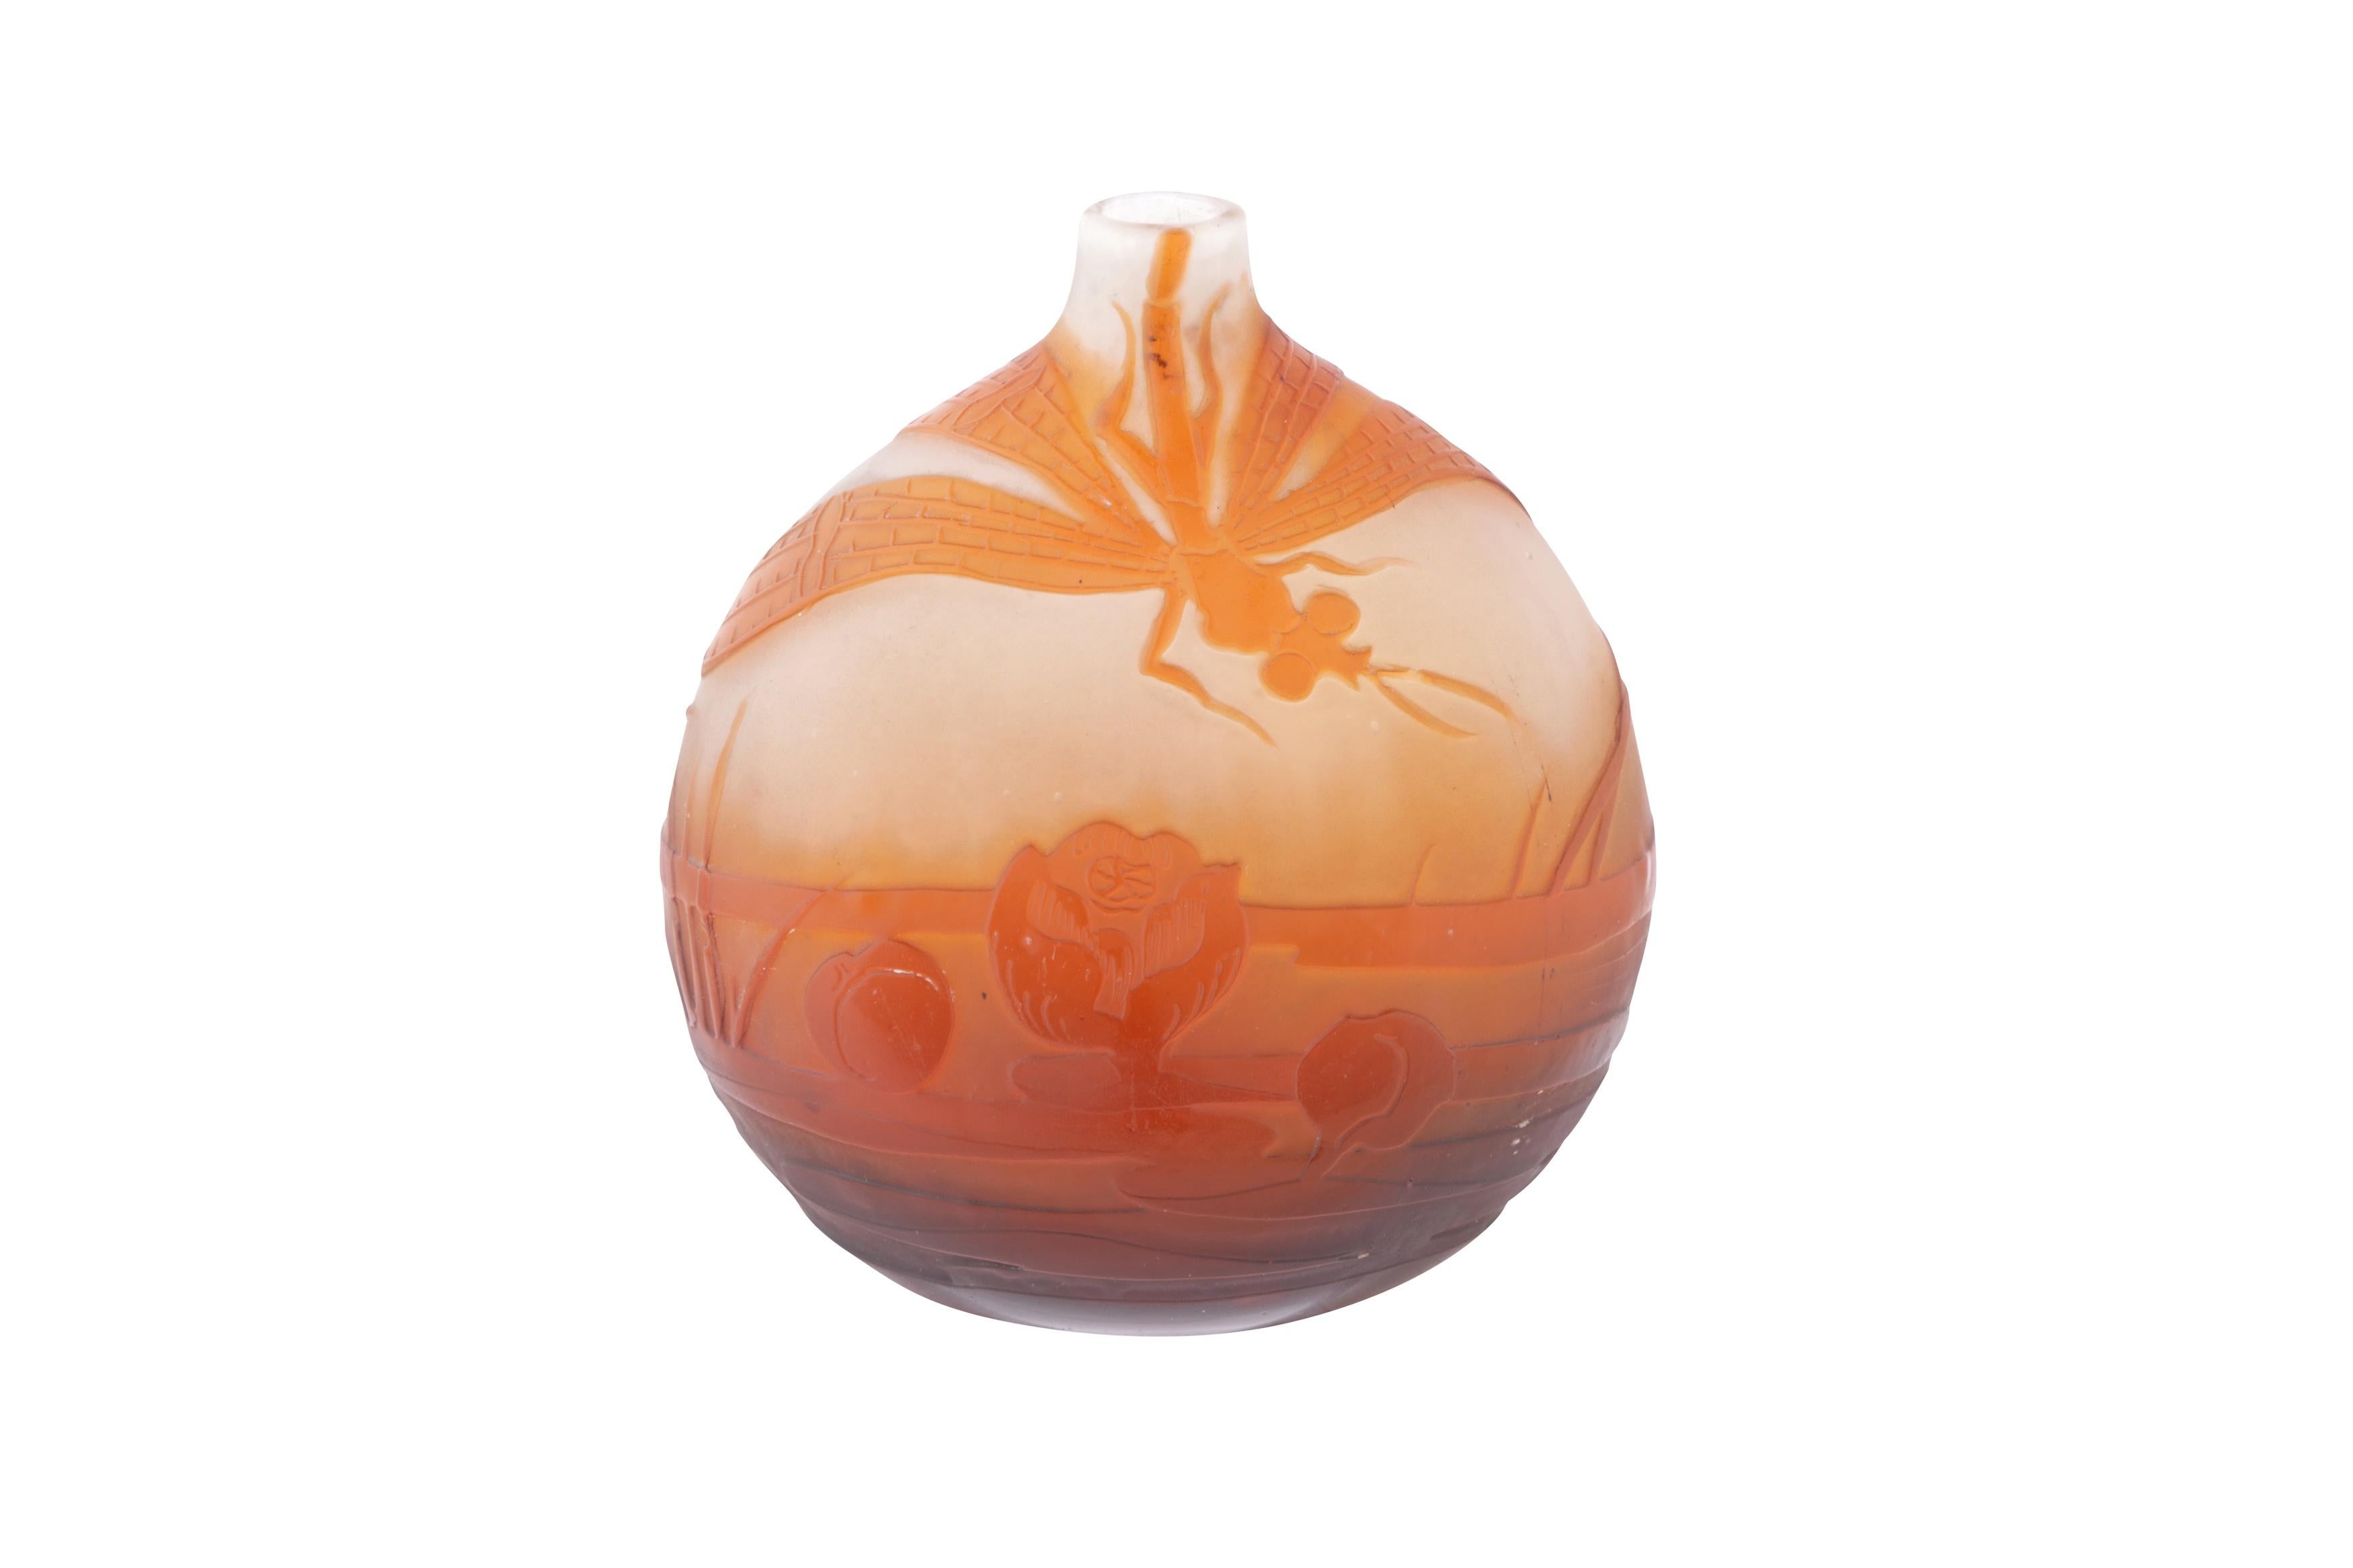 Art Nouveau Cameo Vase by Émile Gallé In Good Condition For Sale In Watford, GB